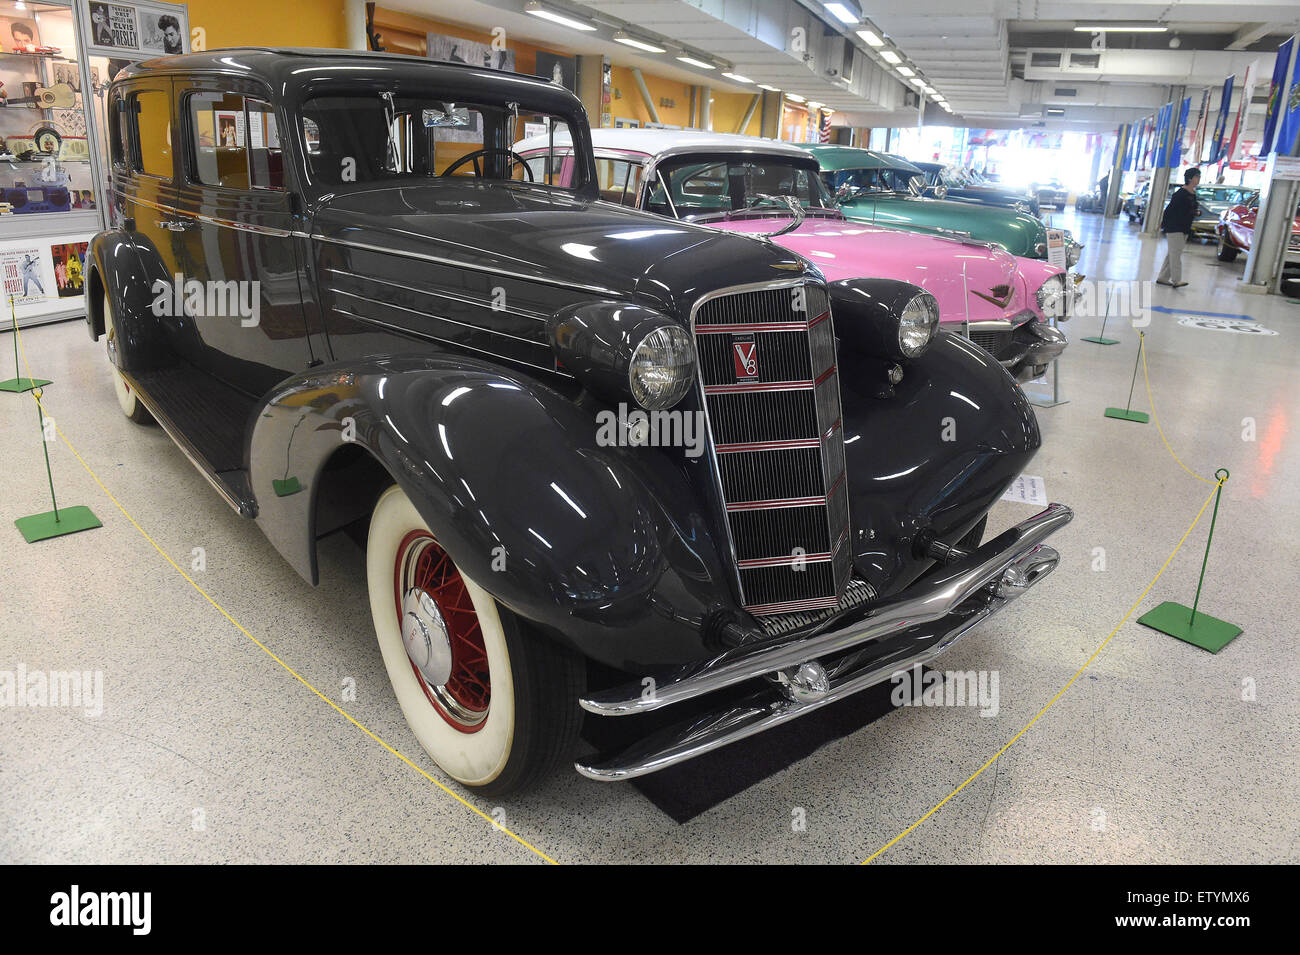 Ostrava, Czech Republic. 16th June, 2015. Exhibition called American Classic Cars from 1930 to 1980 launched today in Ostrava, Czech Republic, June 16, 2015. In the picture is seen Cadillac, 355 D, Fleetwood Bodies car from year 1934. © Jaroslav Ozana/CTK Photo/Alamy Live News Stock Photo